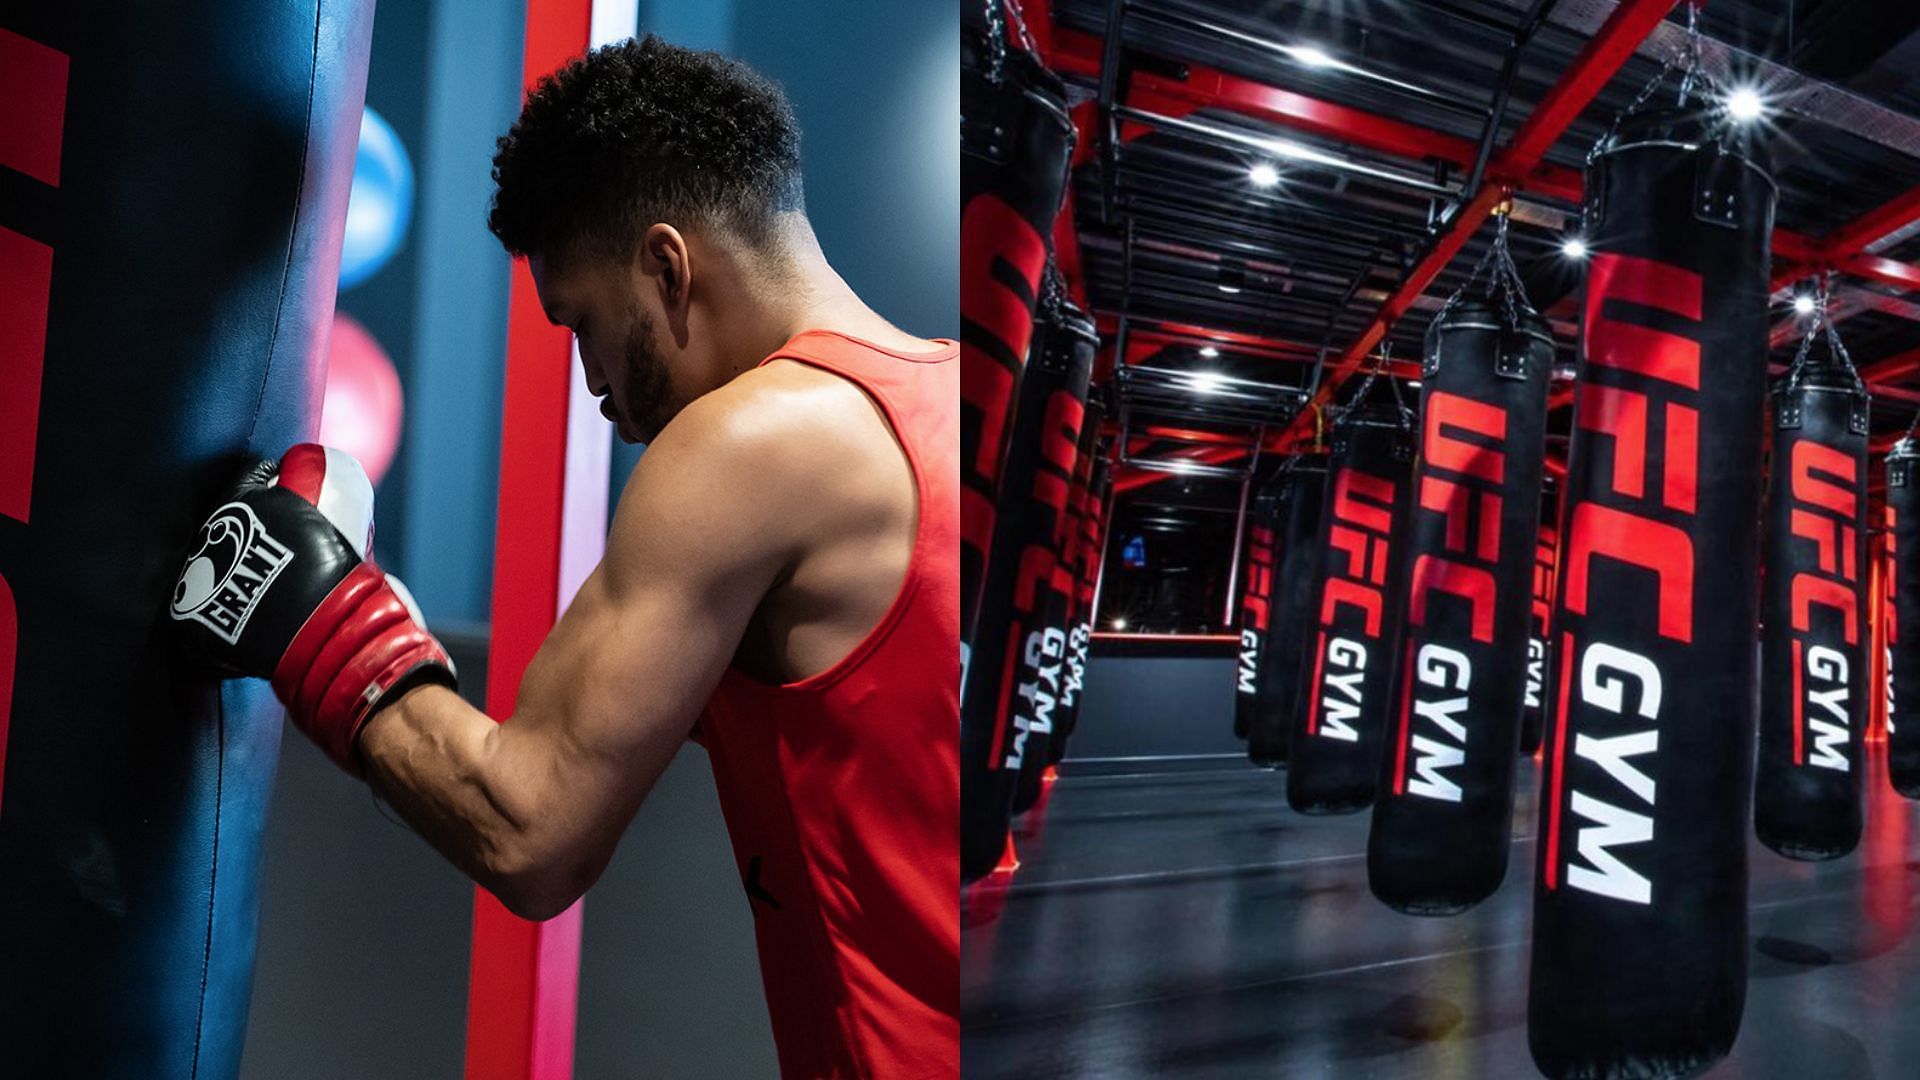 UFC gyms set to open in London and Manchester [Images courtesy of UFCgym.co.uk]